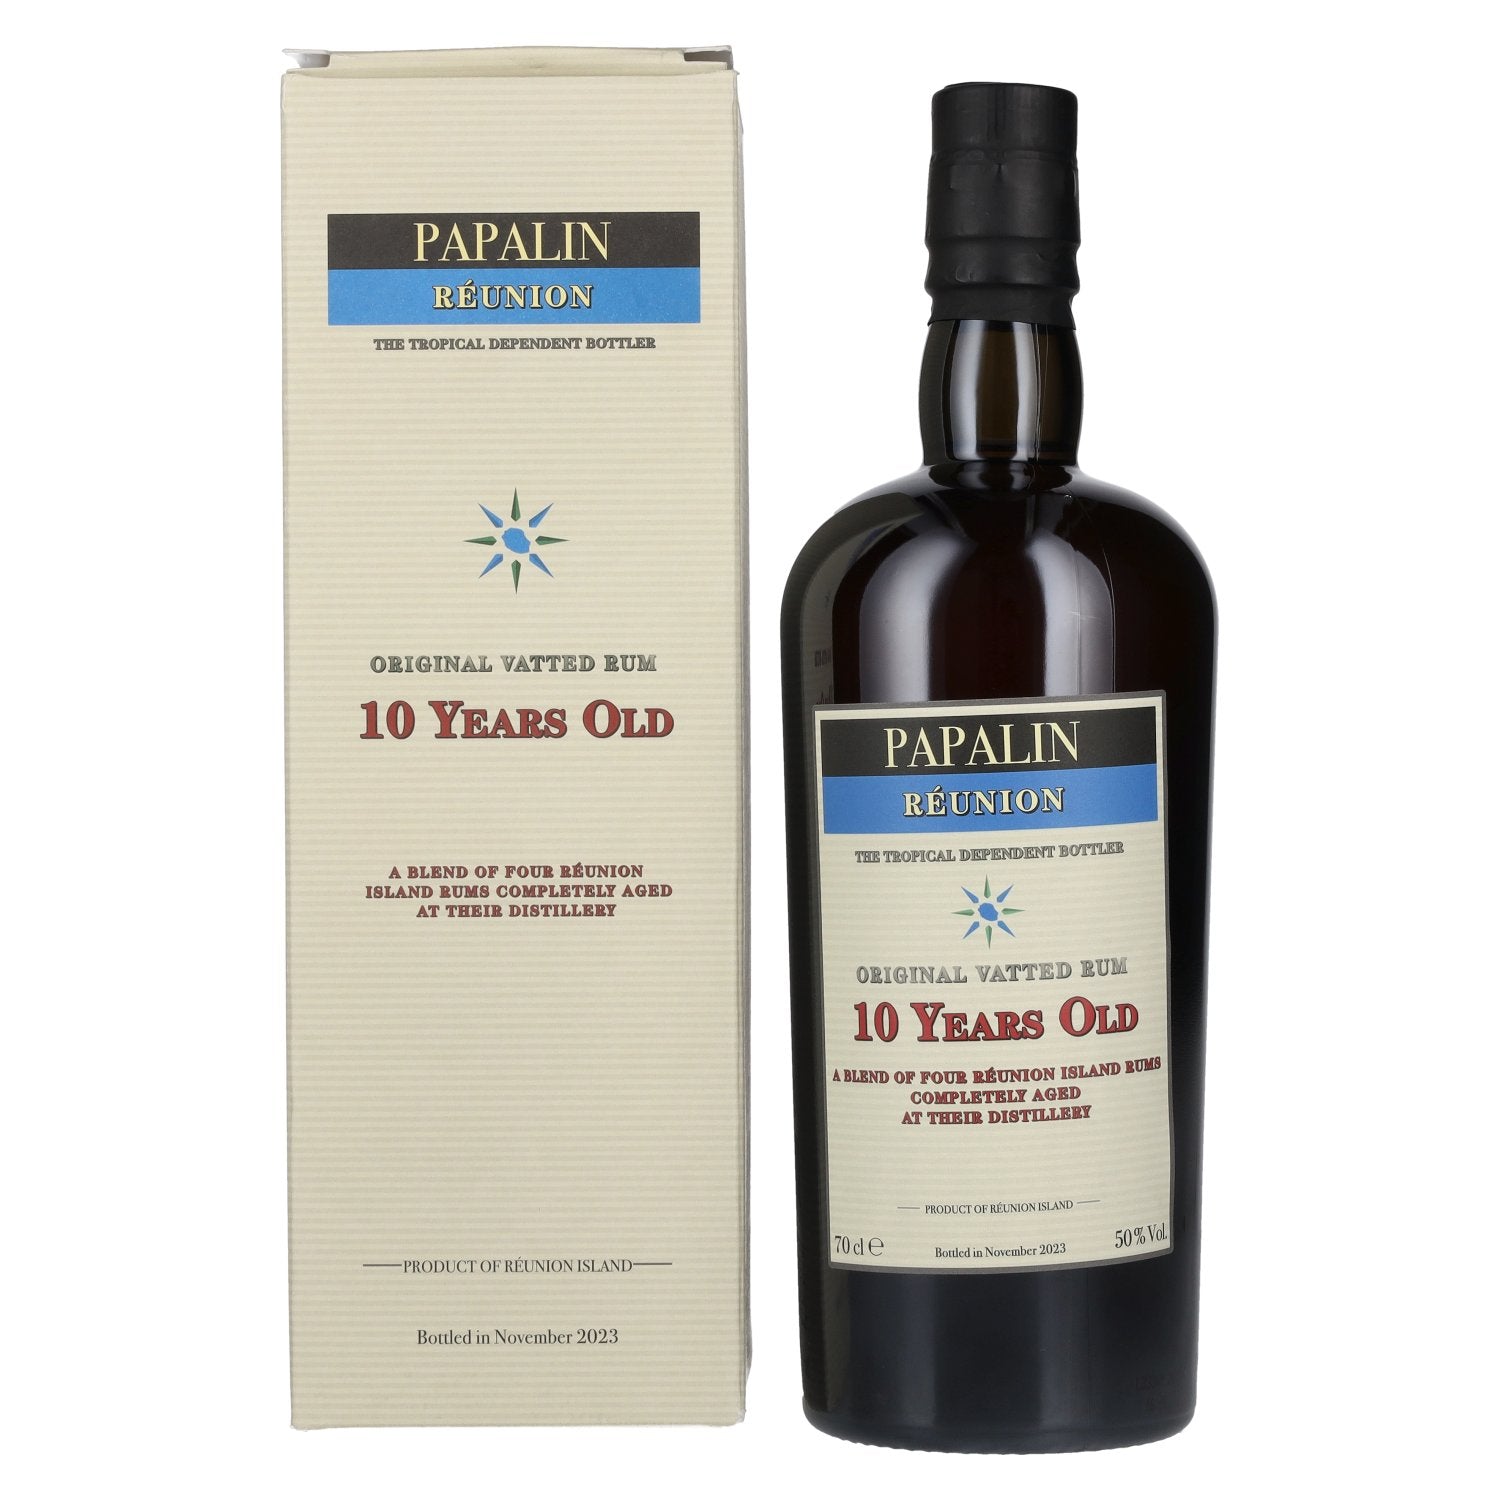 Habitation Velier PAPALIN REUNION 10 Years Old Jamaica Pure Single Rum 50% Vol. 0,7l in Giftbox